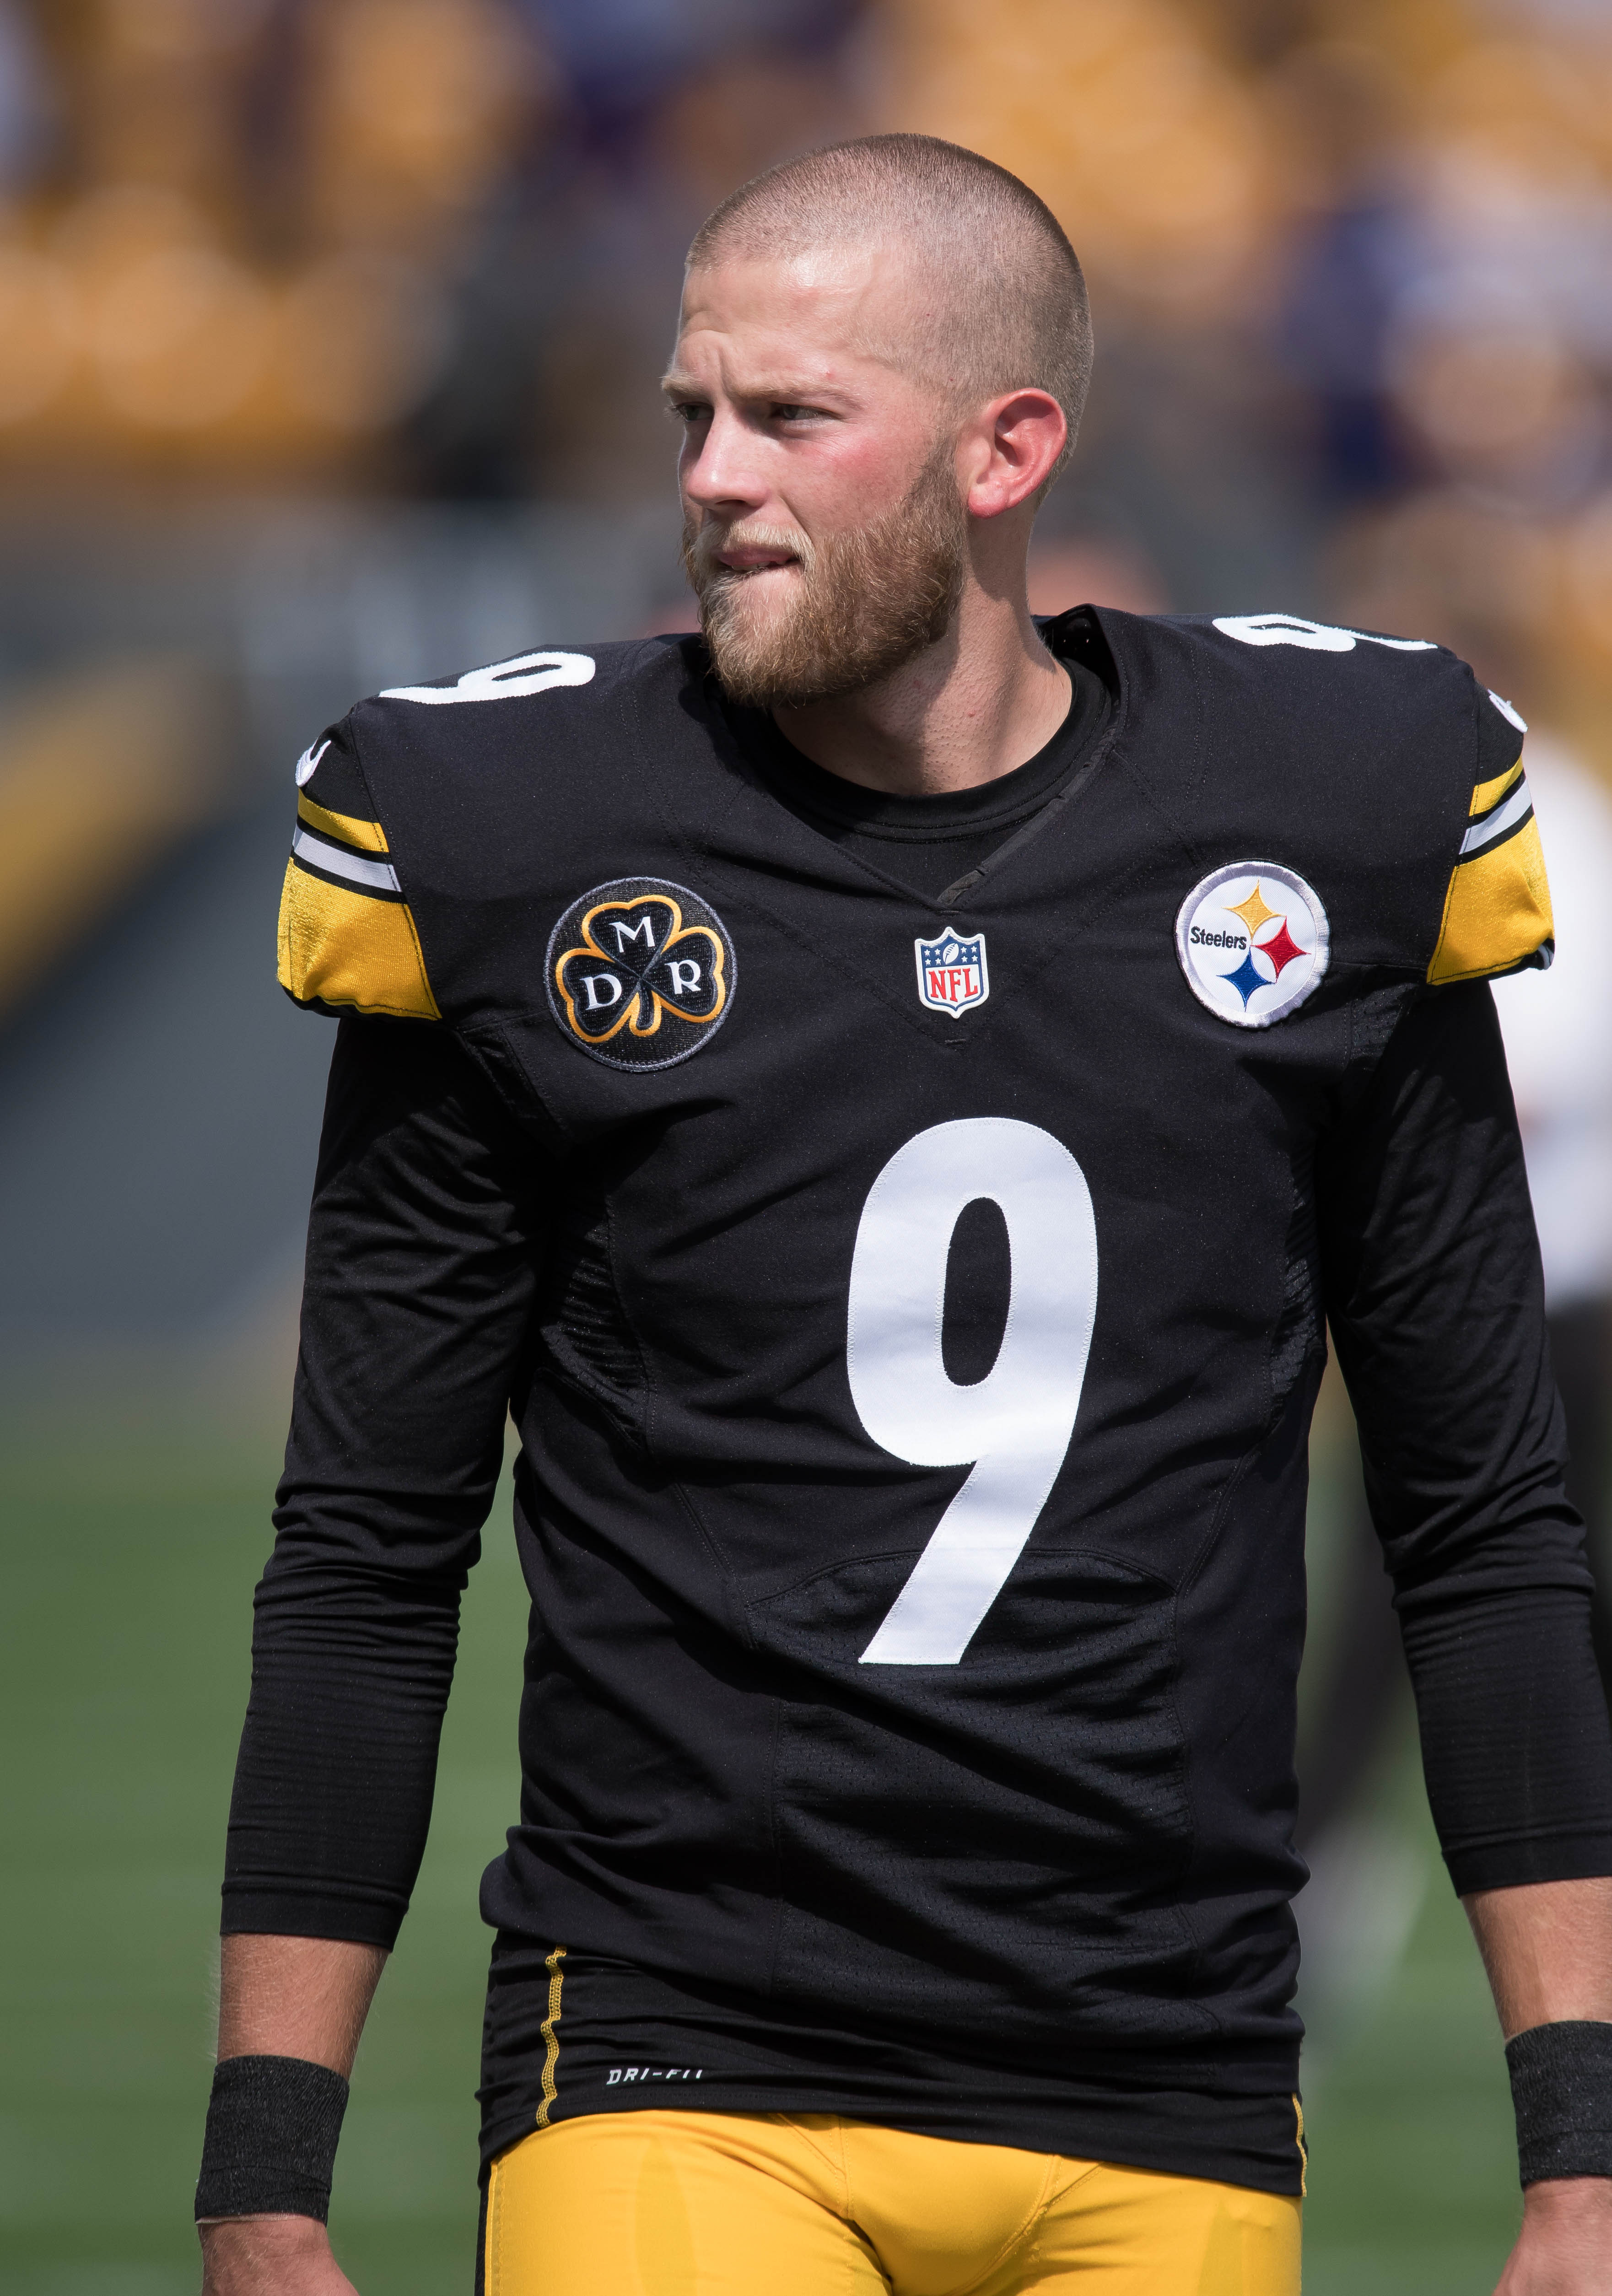 chris boswell jersey